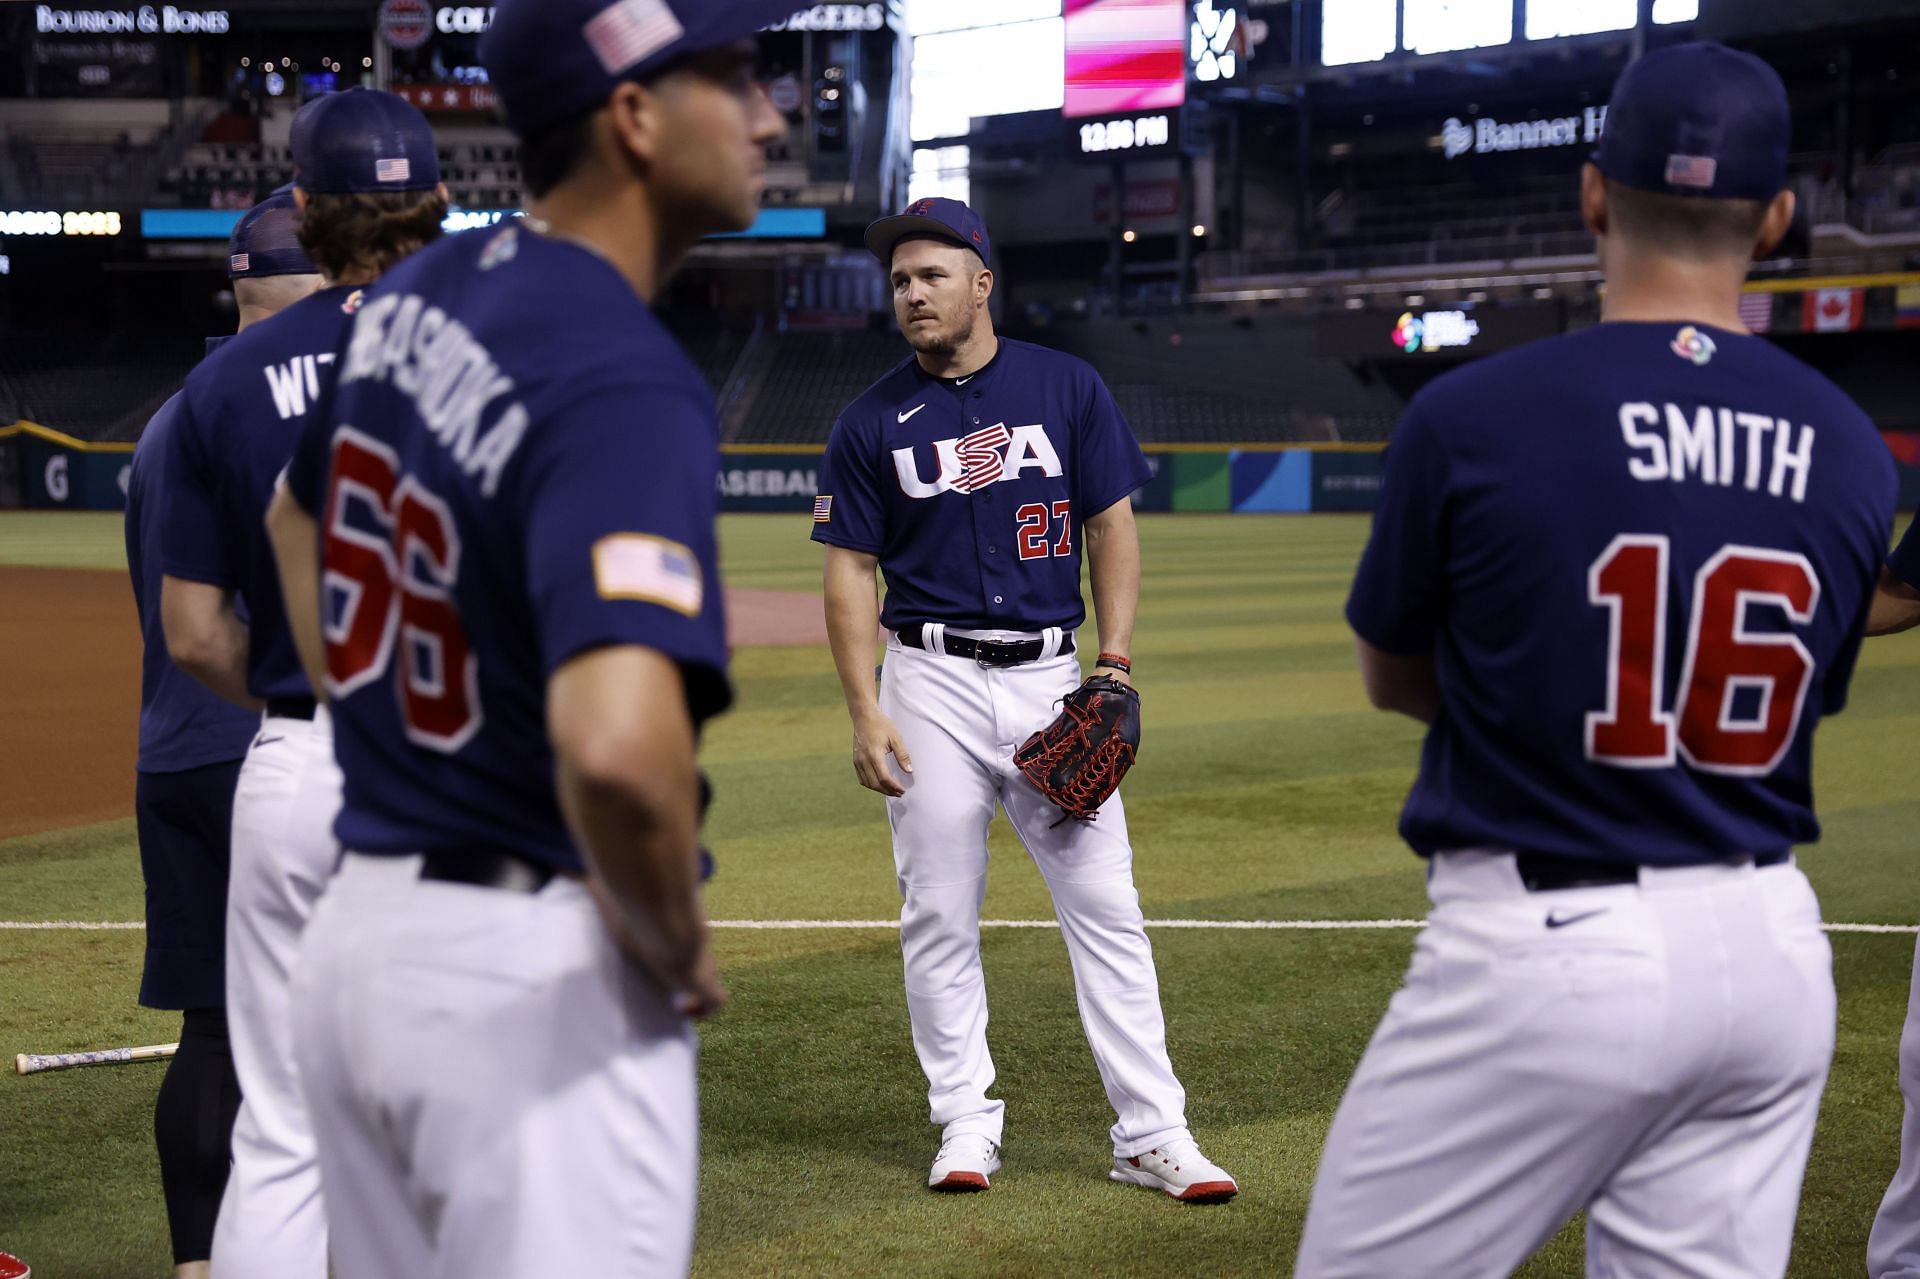 CAPTAIN AMERICA!! Mike Trout has AMAZING World Baseball Classic to